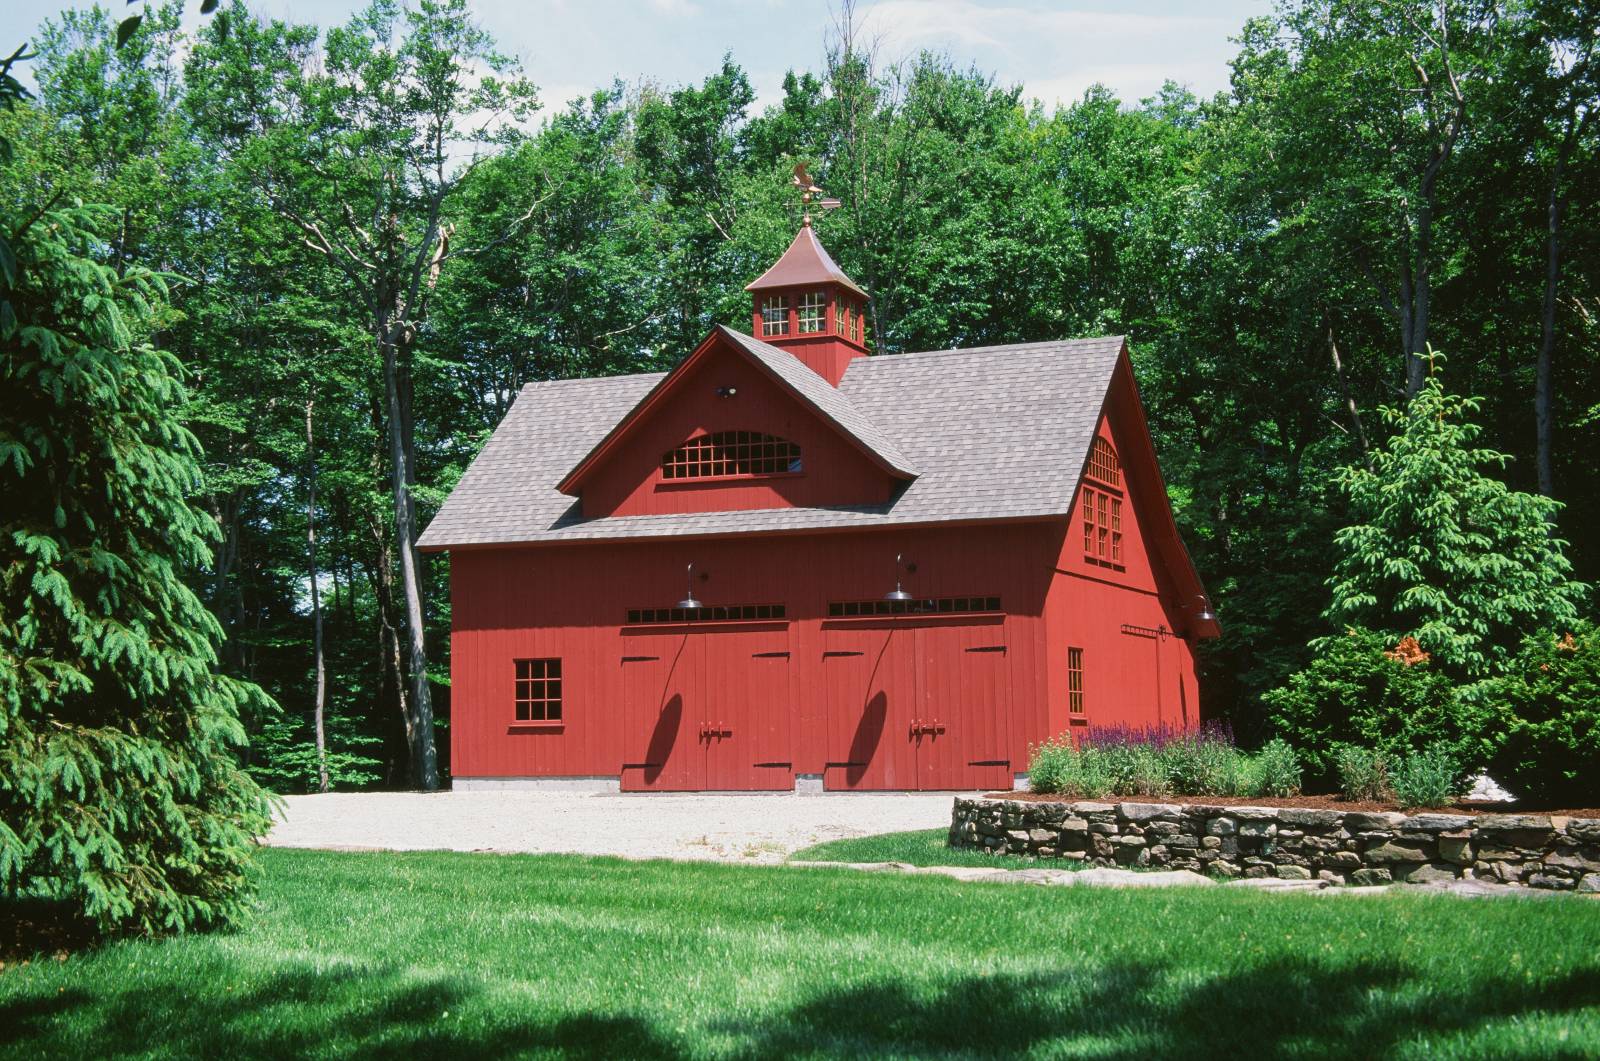 Opposite Angle of the Carriage Barn